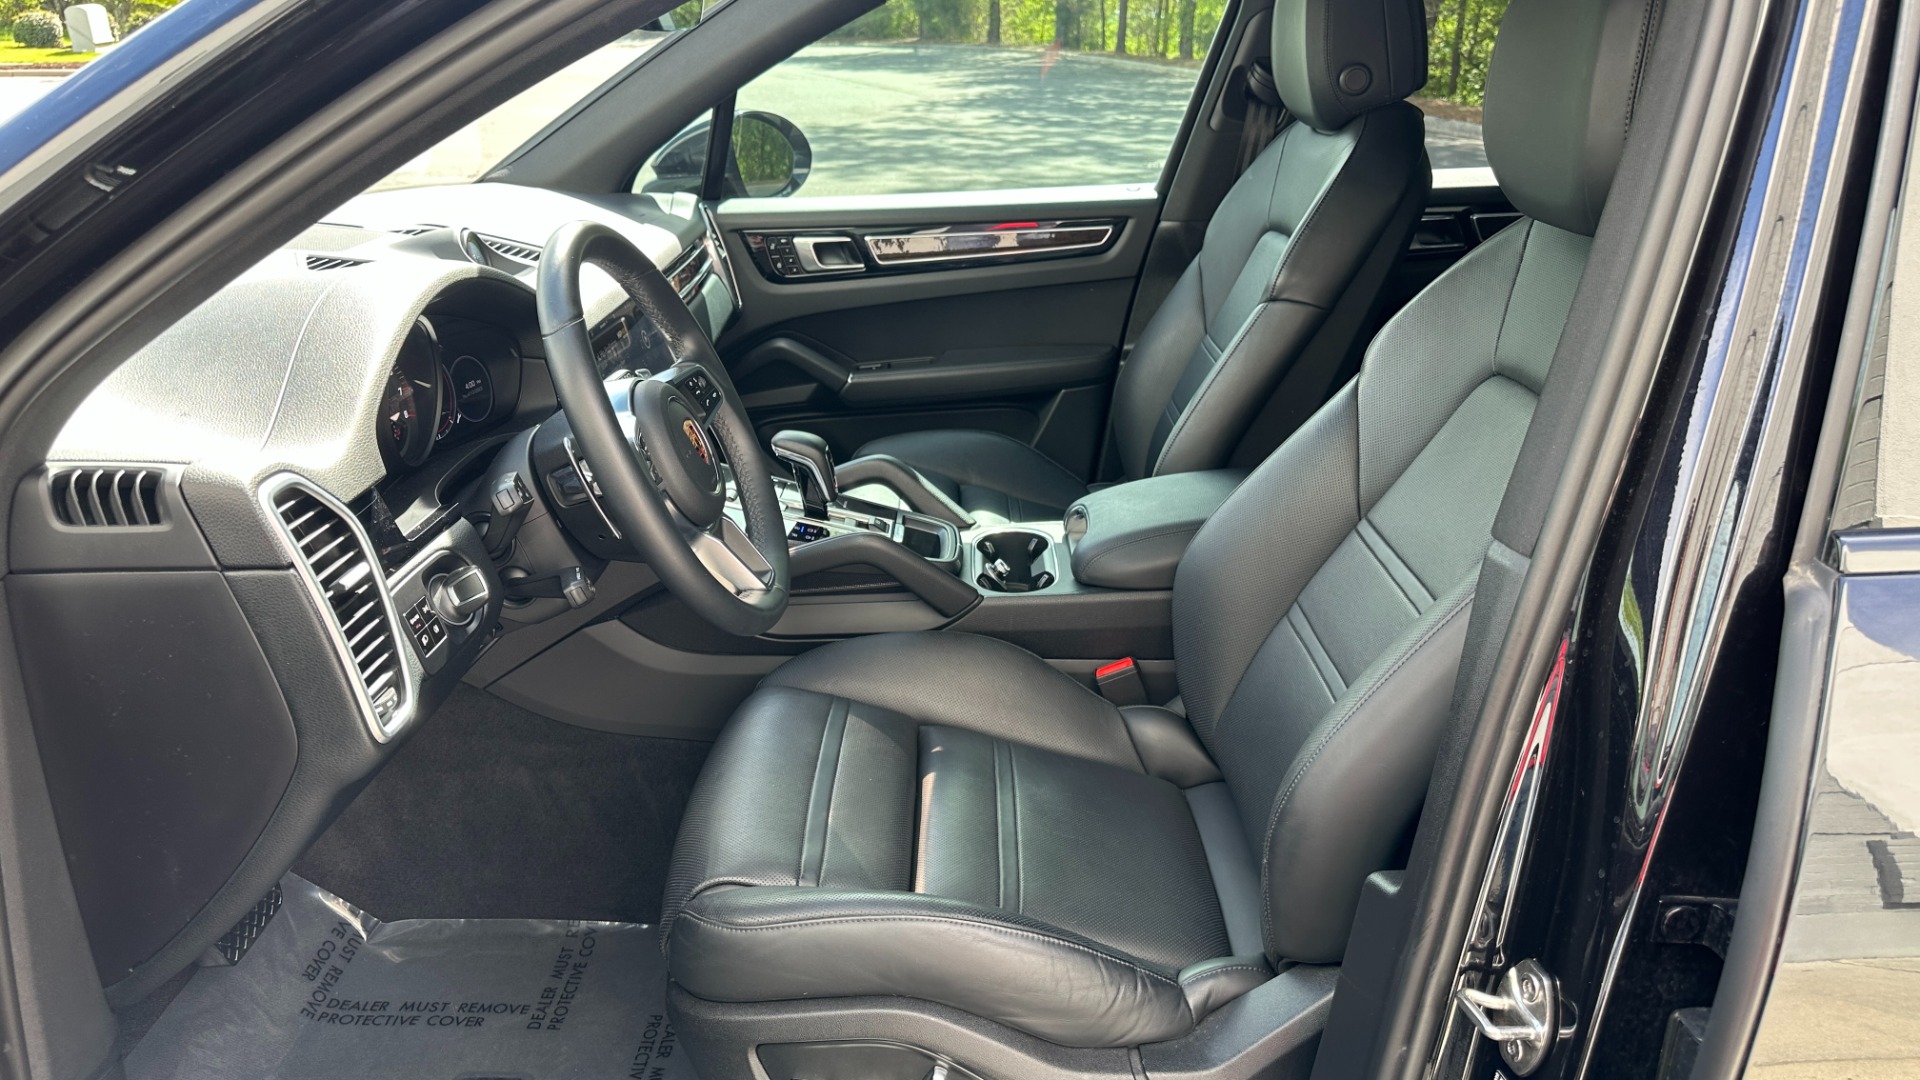 Used 2019 Porsche Cayenne AWD / PREMIUM / TOWING PKG / BOSE AUDIO / GLOSS BLACK TRIM for sale $54,995 at Formula Imports in Charlotte NC 28227 12